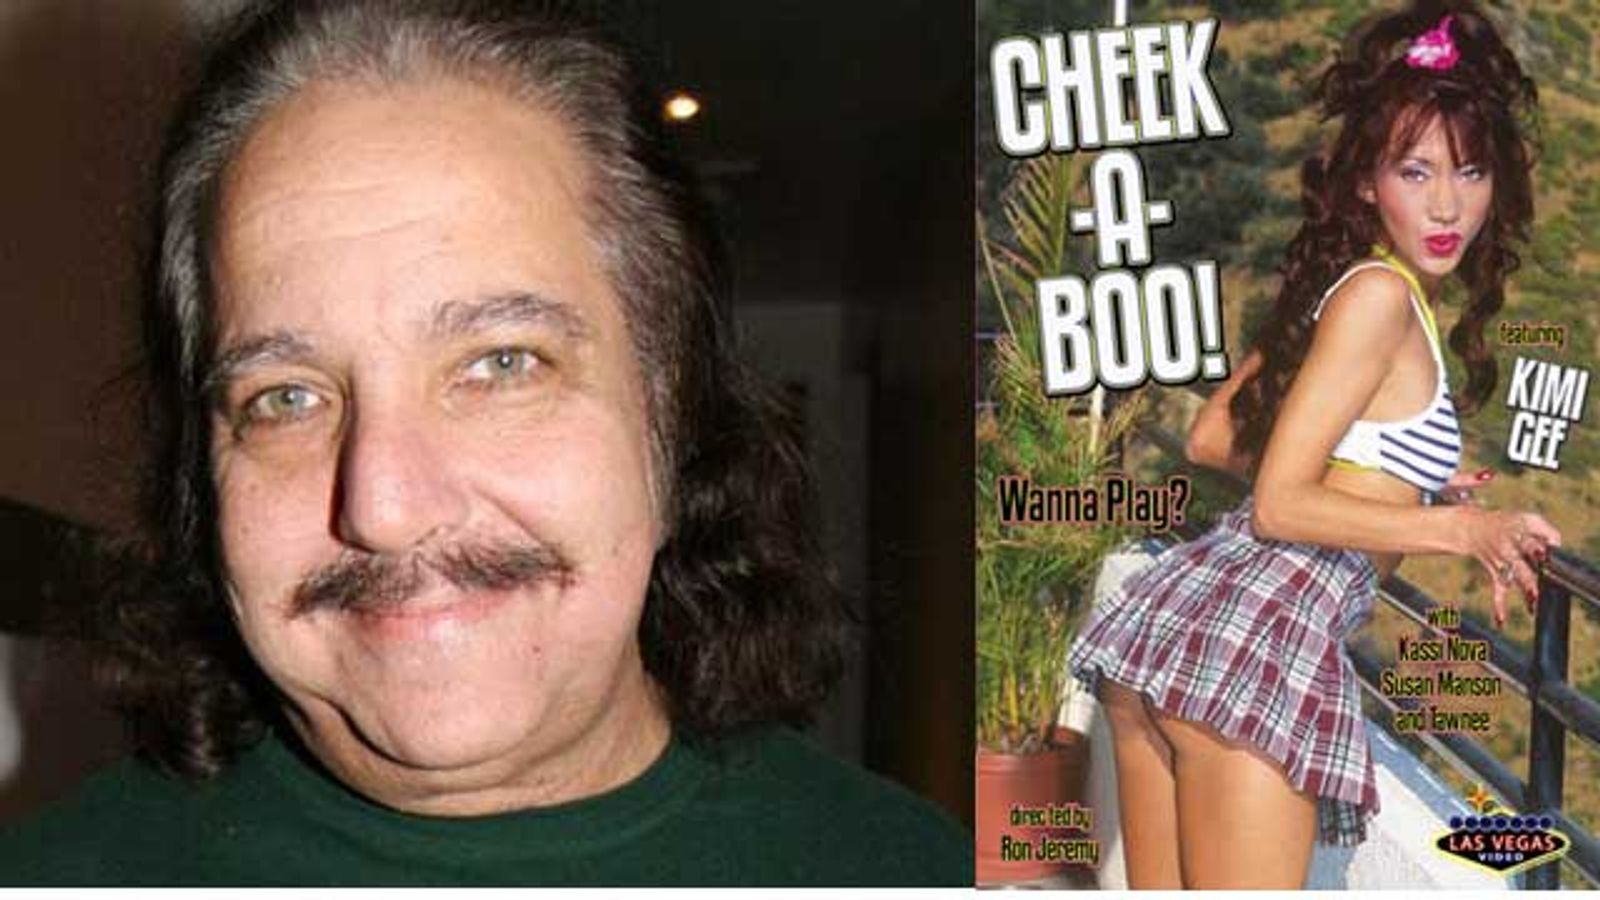 Anal-fest 'Cheek A Boo' Now Available For 1st Time On DVD